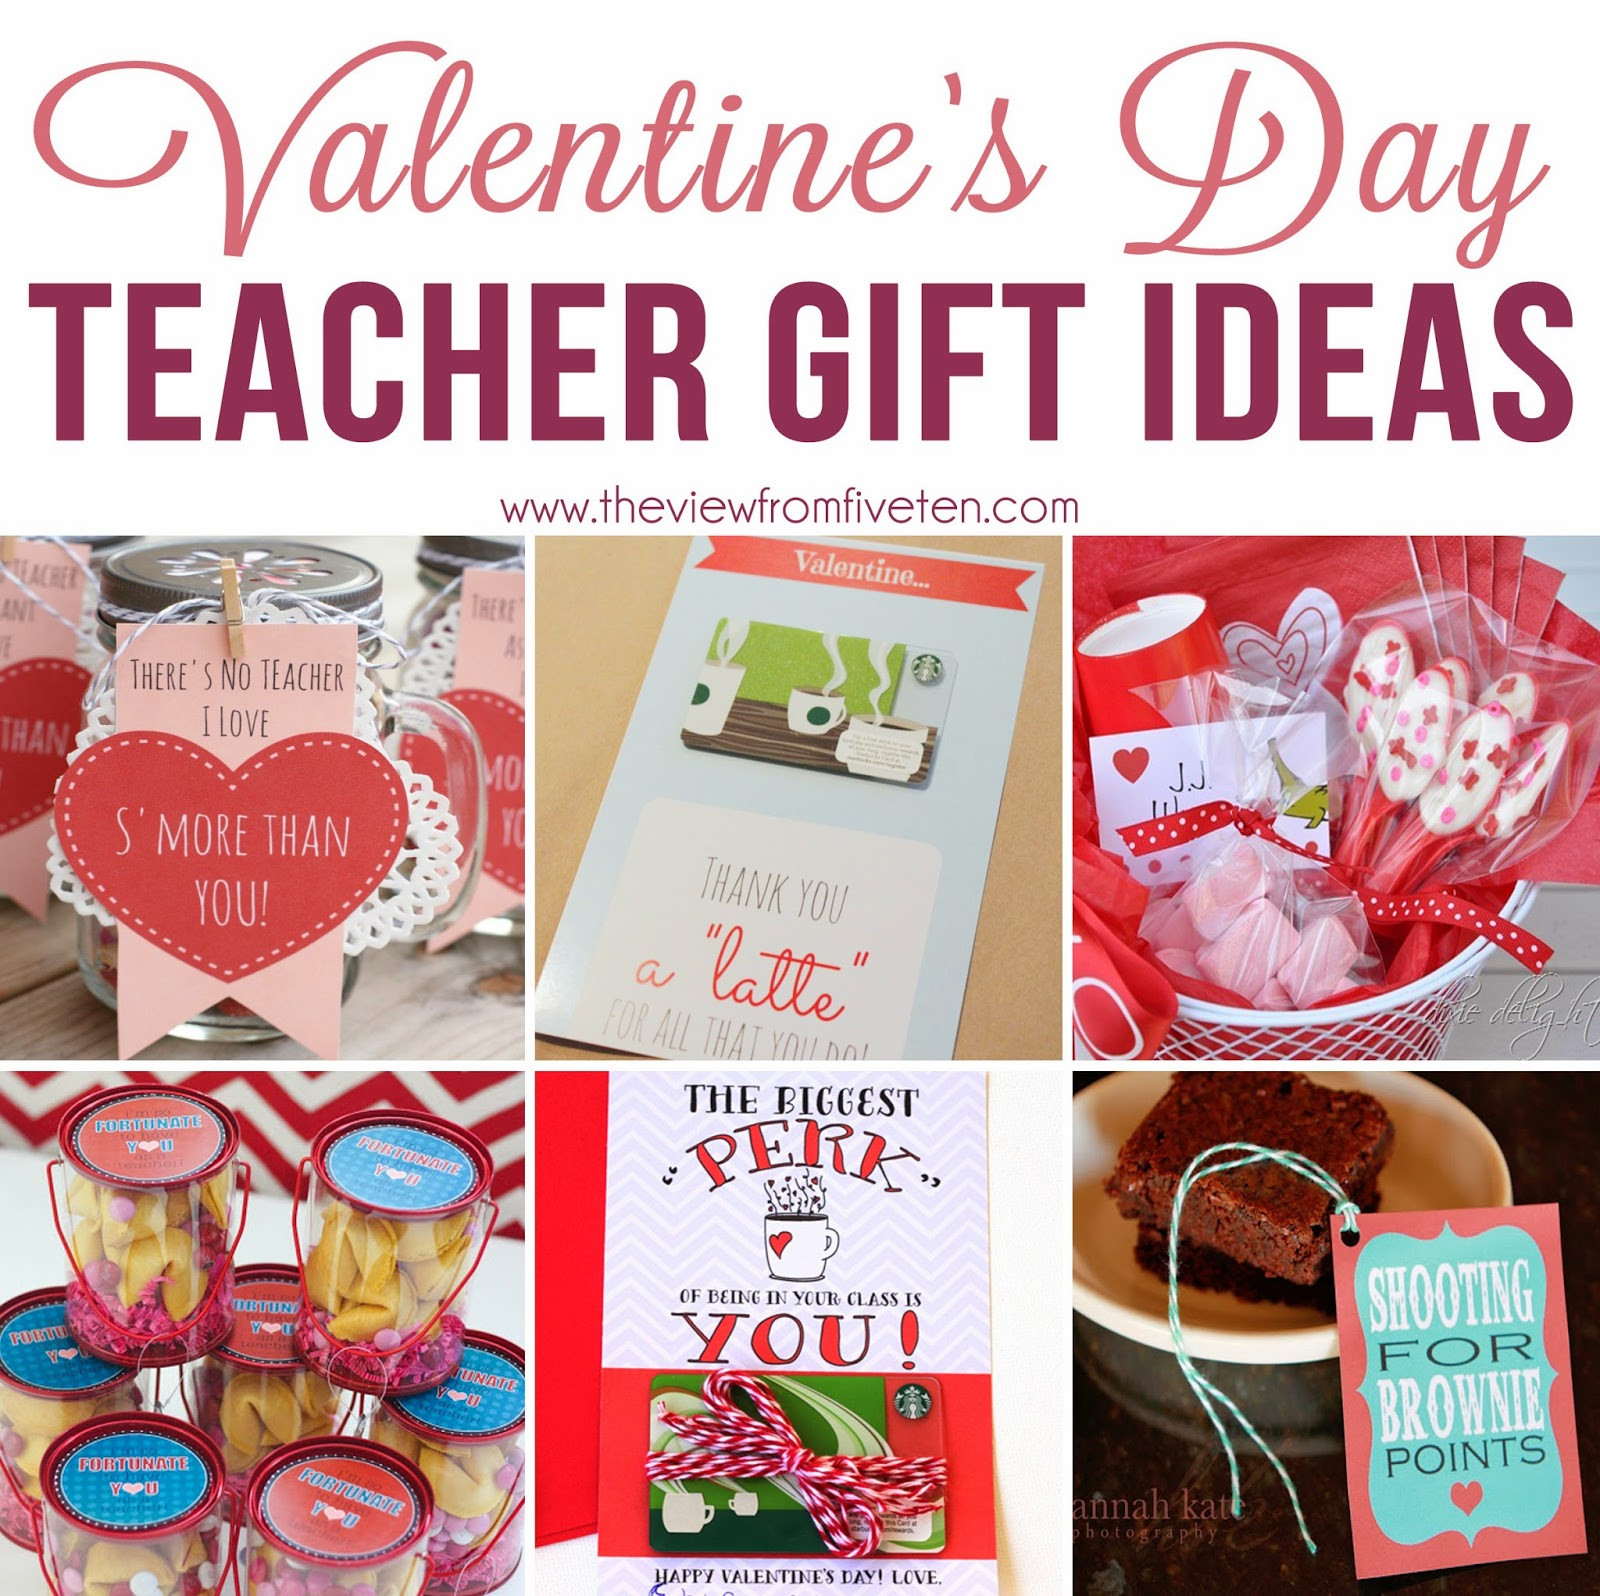 Valentines Day Gift For Teacher
 The View From 510 Valentine s Day Gift Ideas for Teachers